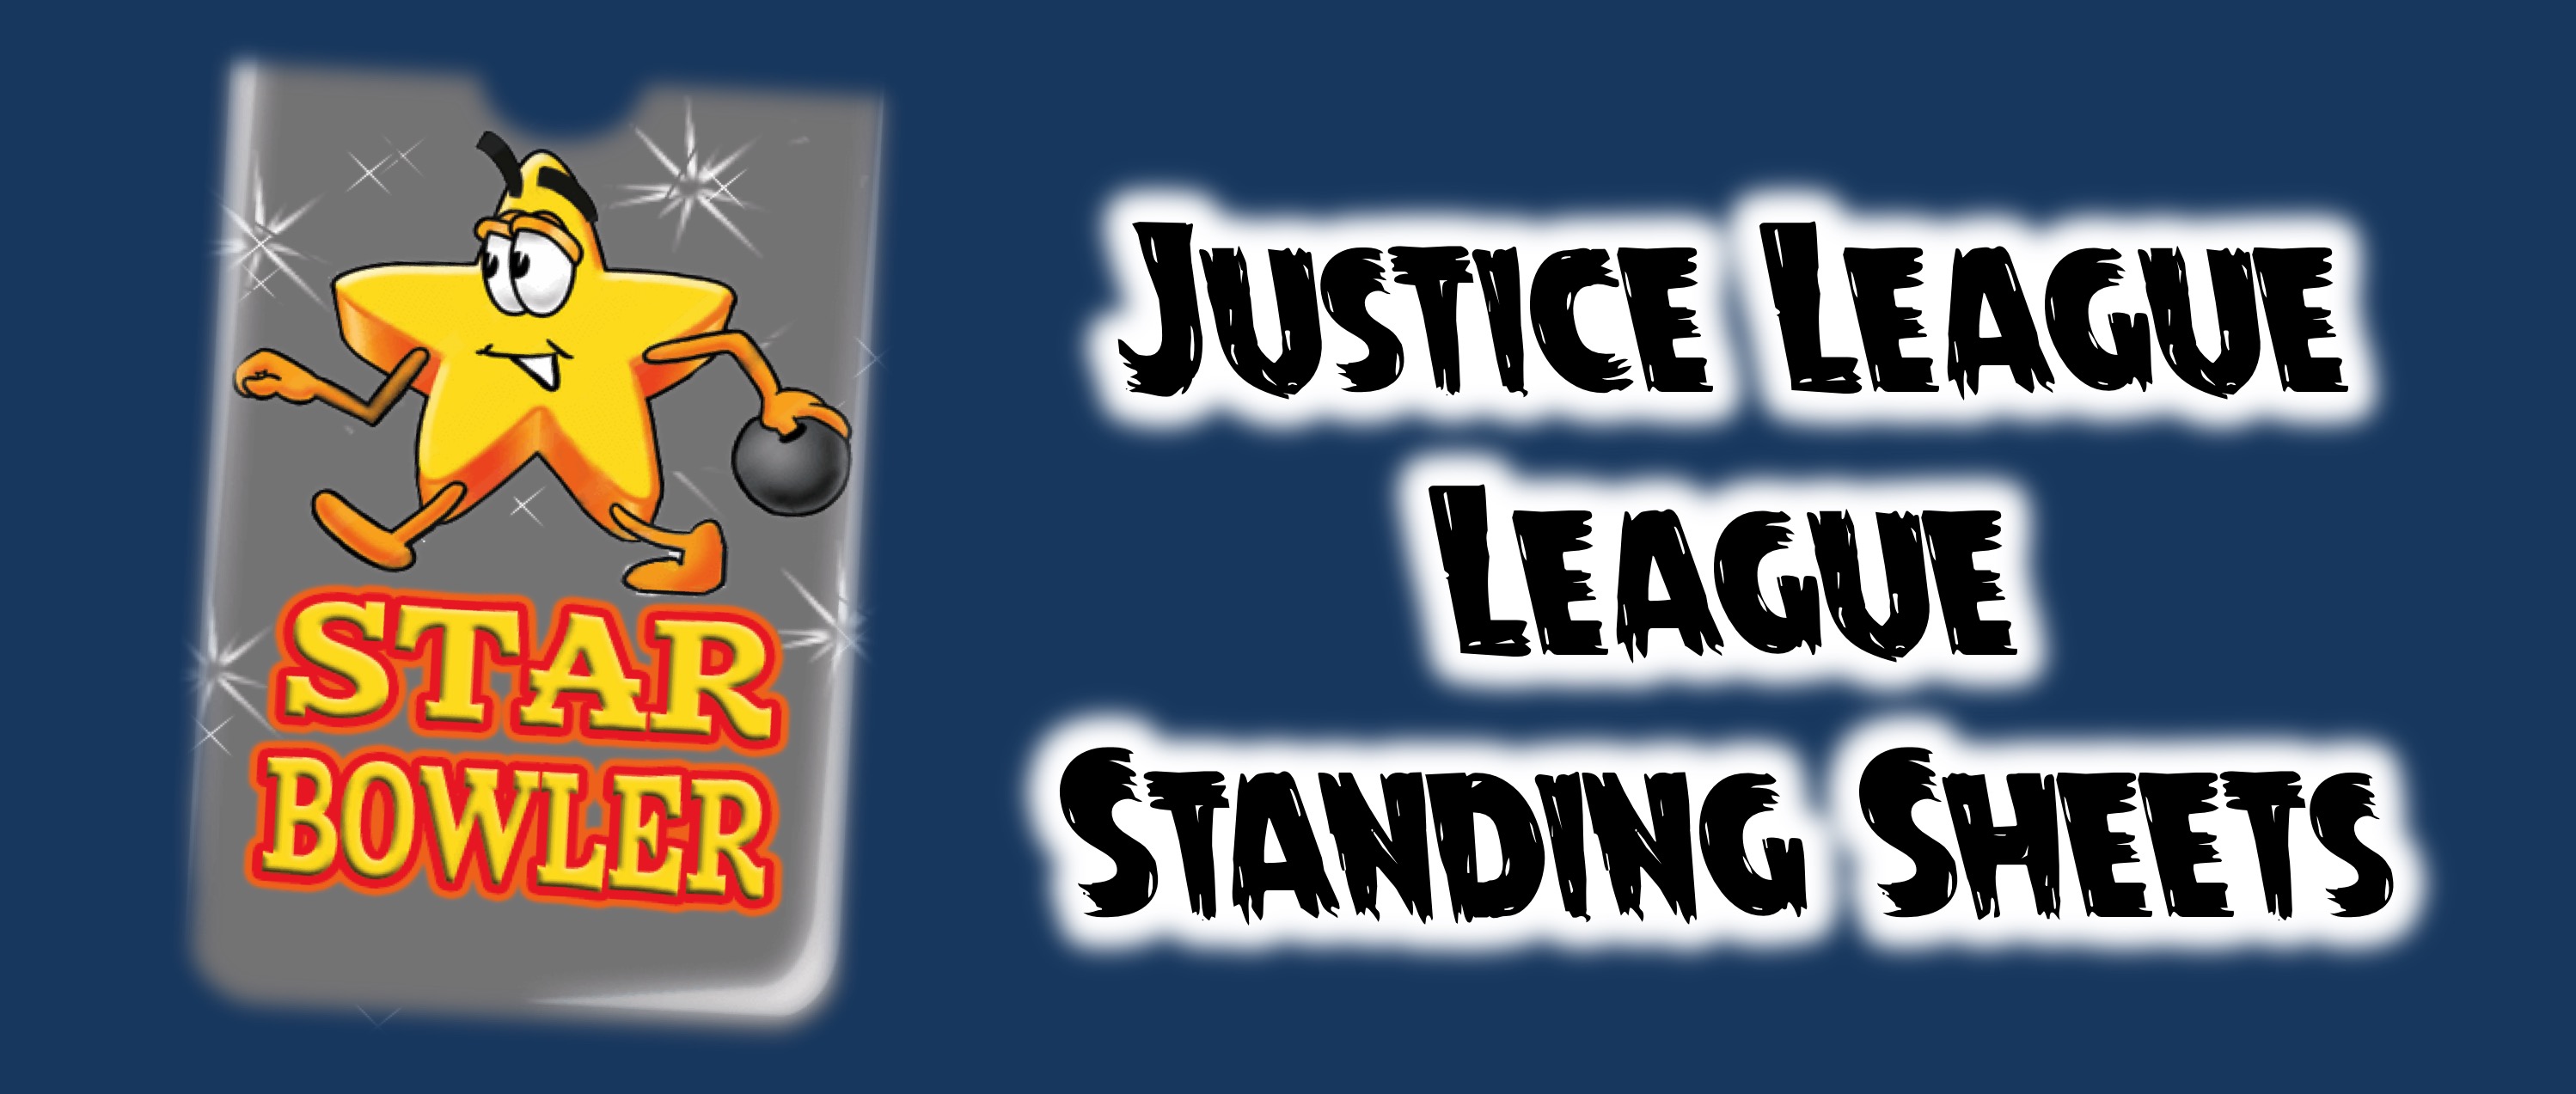 Justice League Standing Sheets